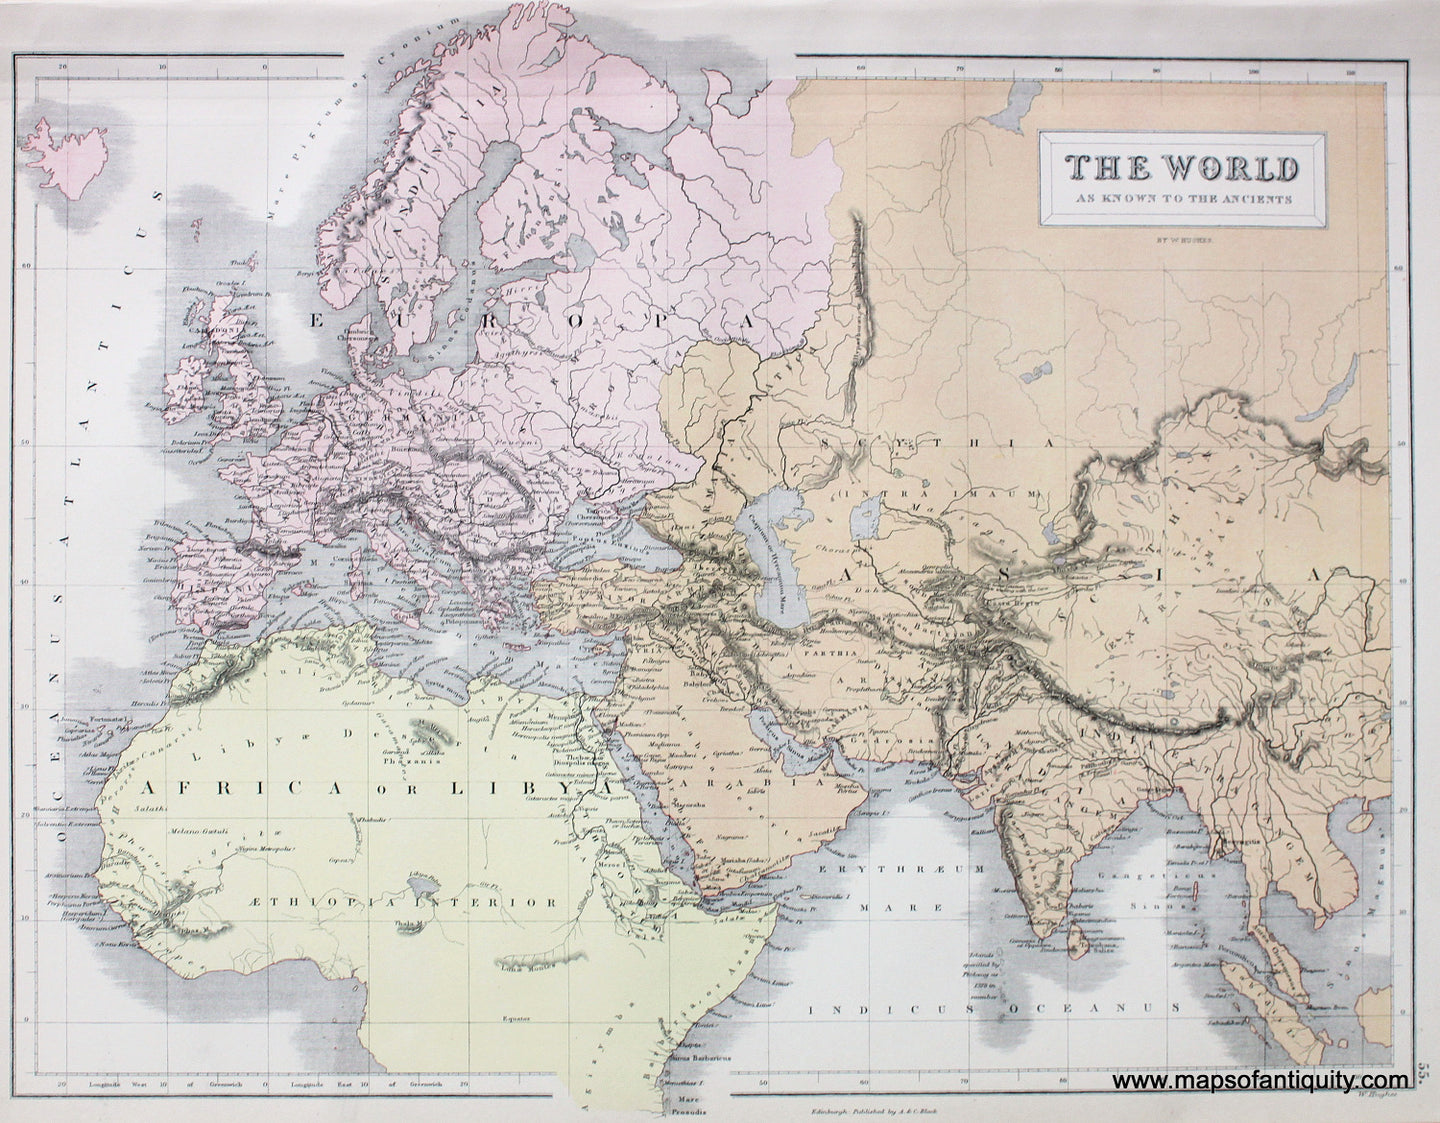 Antique-printed-color-Map-The-World-as-known-to-the-Ancients-World-Europe-Asia-Africa-1879-Black-Maps-Of-Antiquity